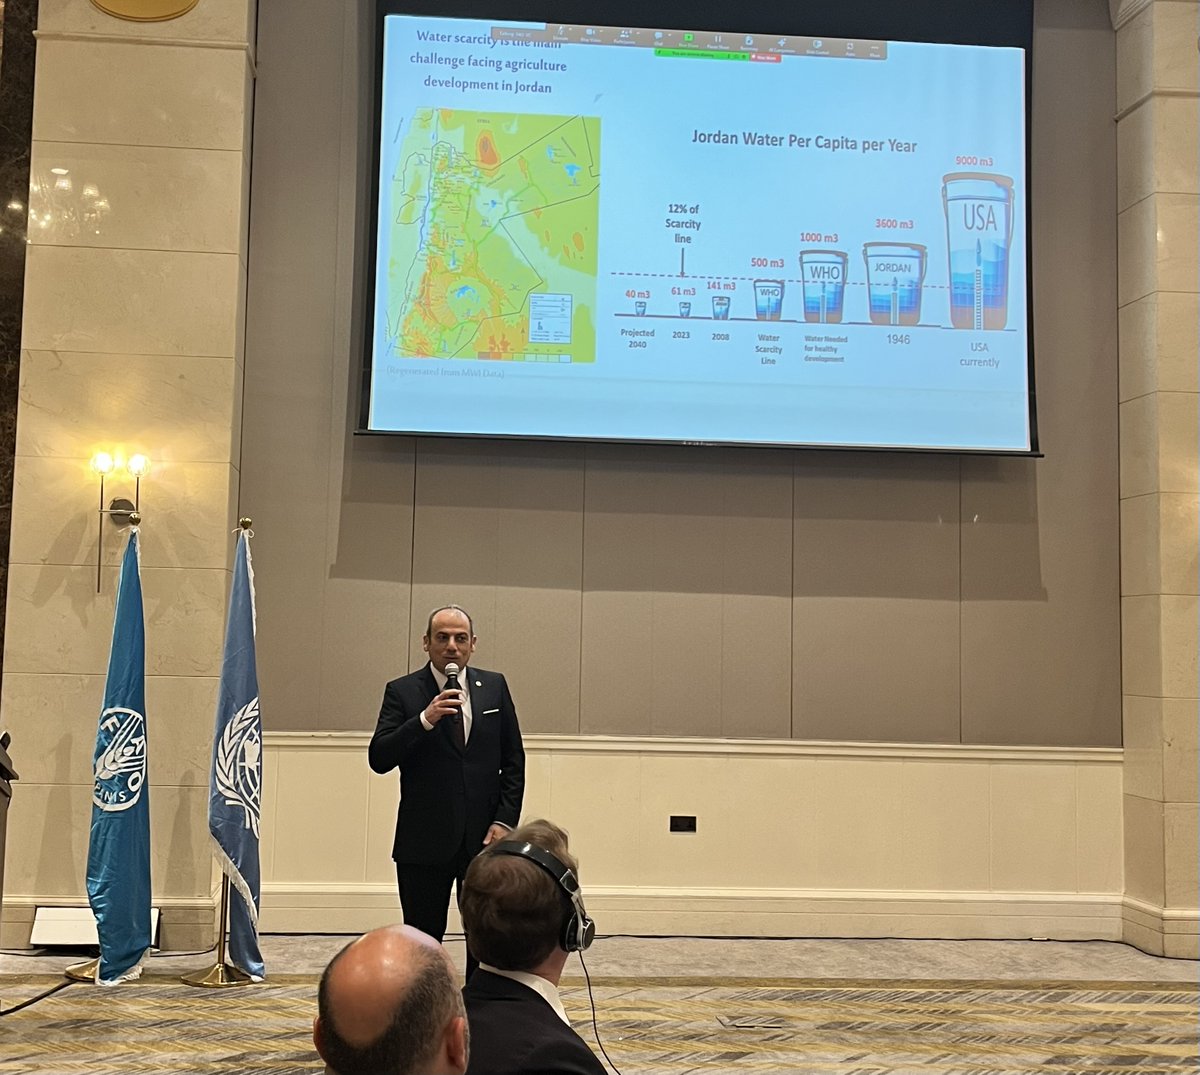 .@FAO launches the 'Ecosystem-Based Solutions and Utilization of Non-Conventional Water for Agriculture in #Jordan' workshop to address #water challenges & utilization of non-conventional water sources for #agriculture in 🇯🇴.